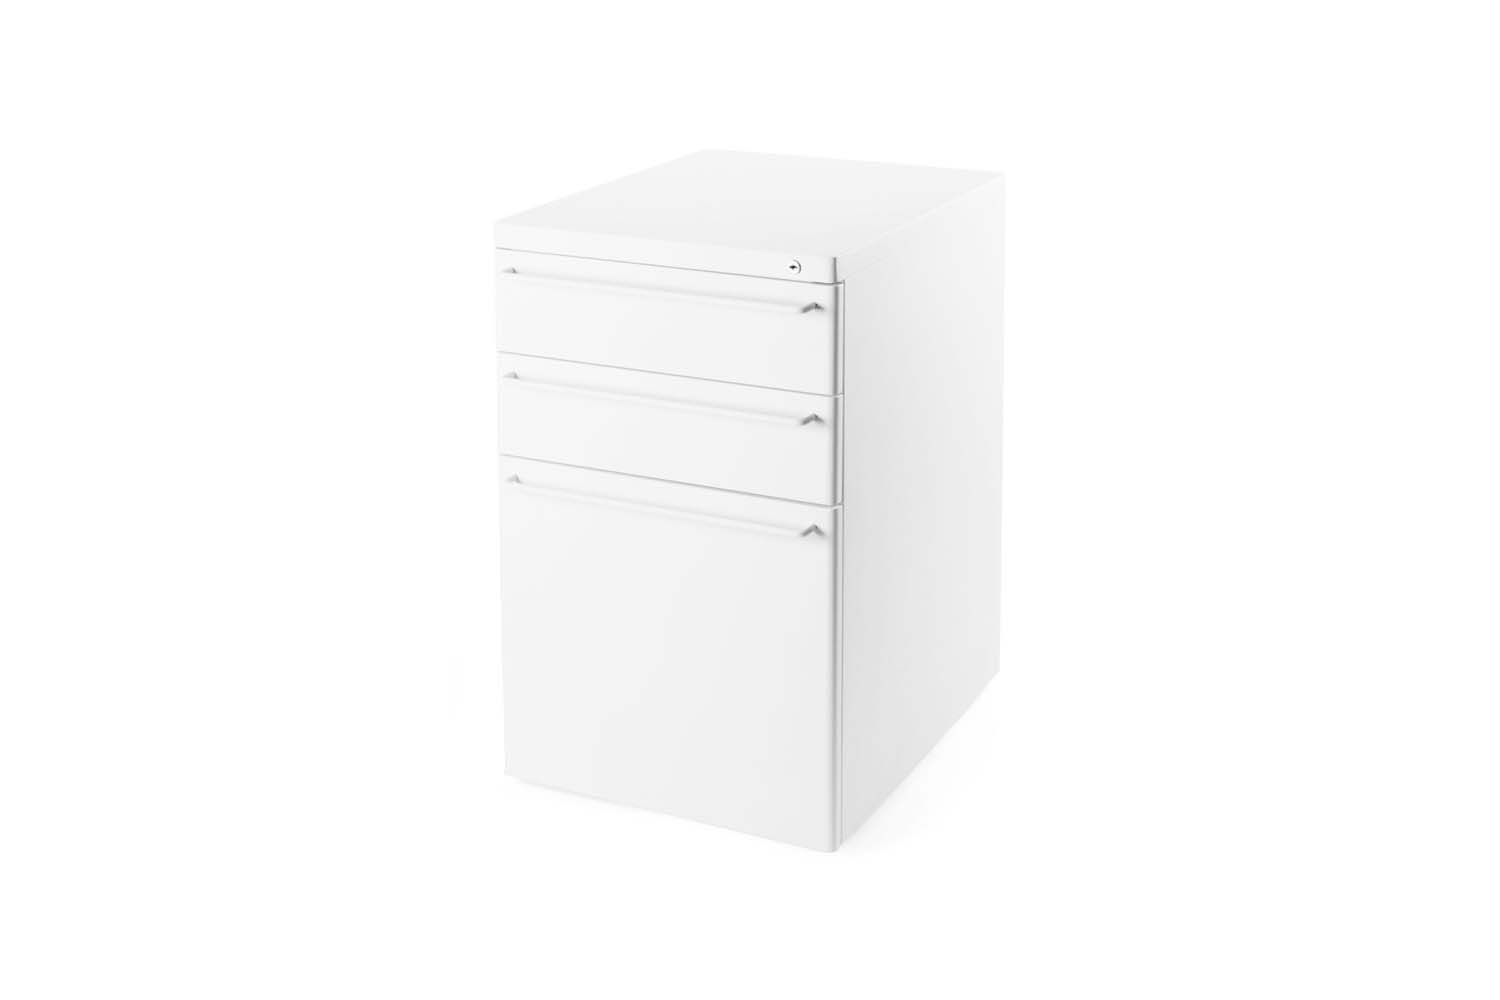 10 Easy Pieces Modern Metal File Cabinets On Wheels The Organized intended for dimensions 1500 X 1000